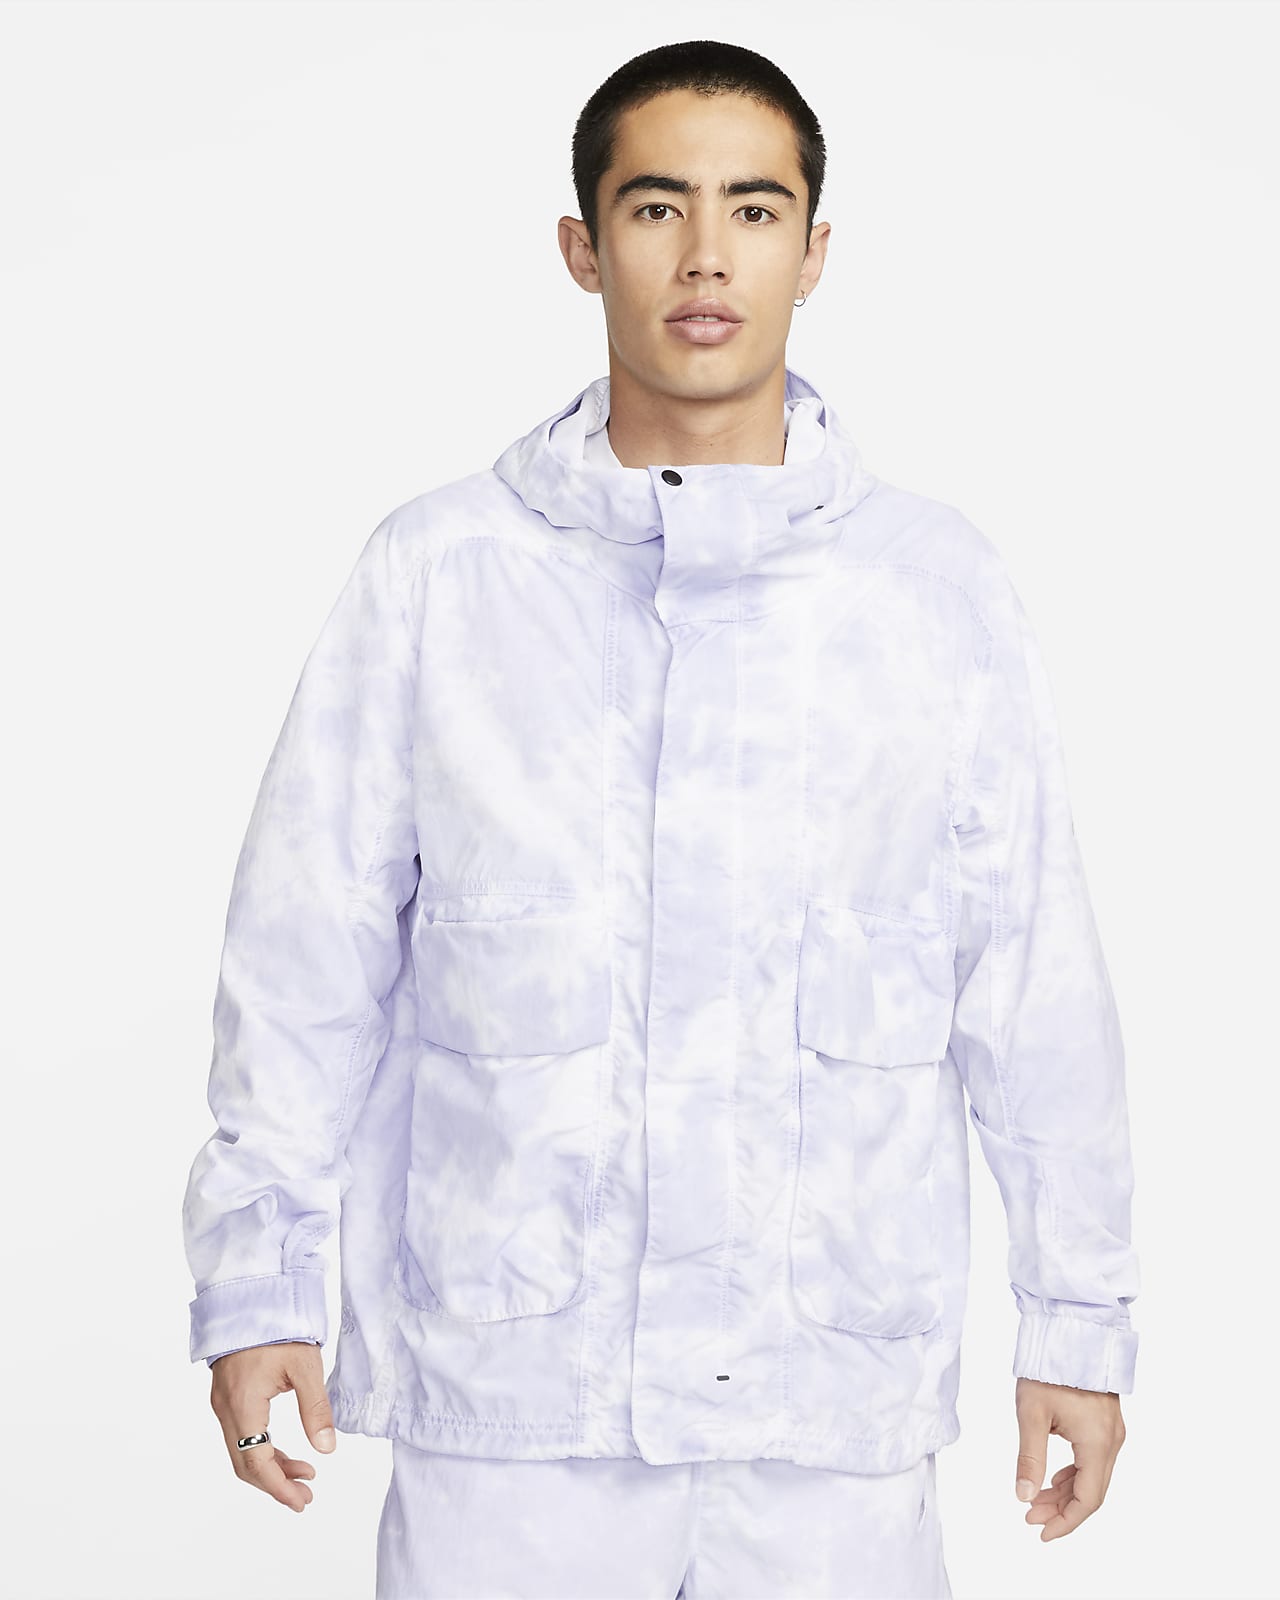 https://static.nike.com/a/images/t_PDP_1280_v1/f_auto,q_auto:eco/73b1eaf7-03be-4817-8814-9aacbf6d77a8/sportswear-tech-pack-mens-woven-hooded-jacket-RpVXVK.png